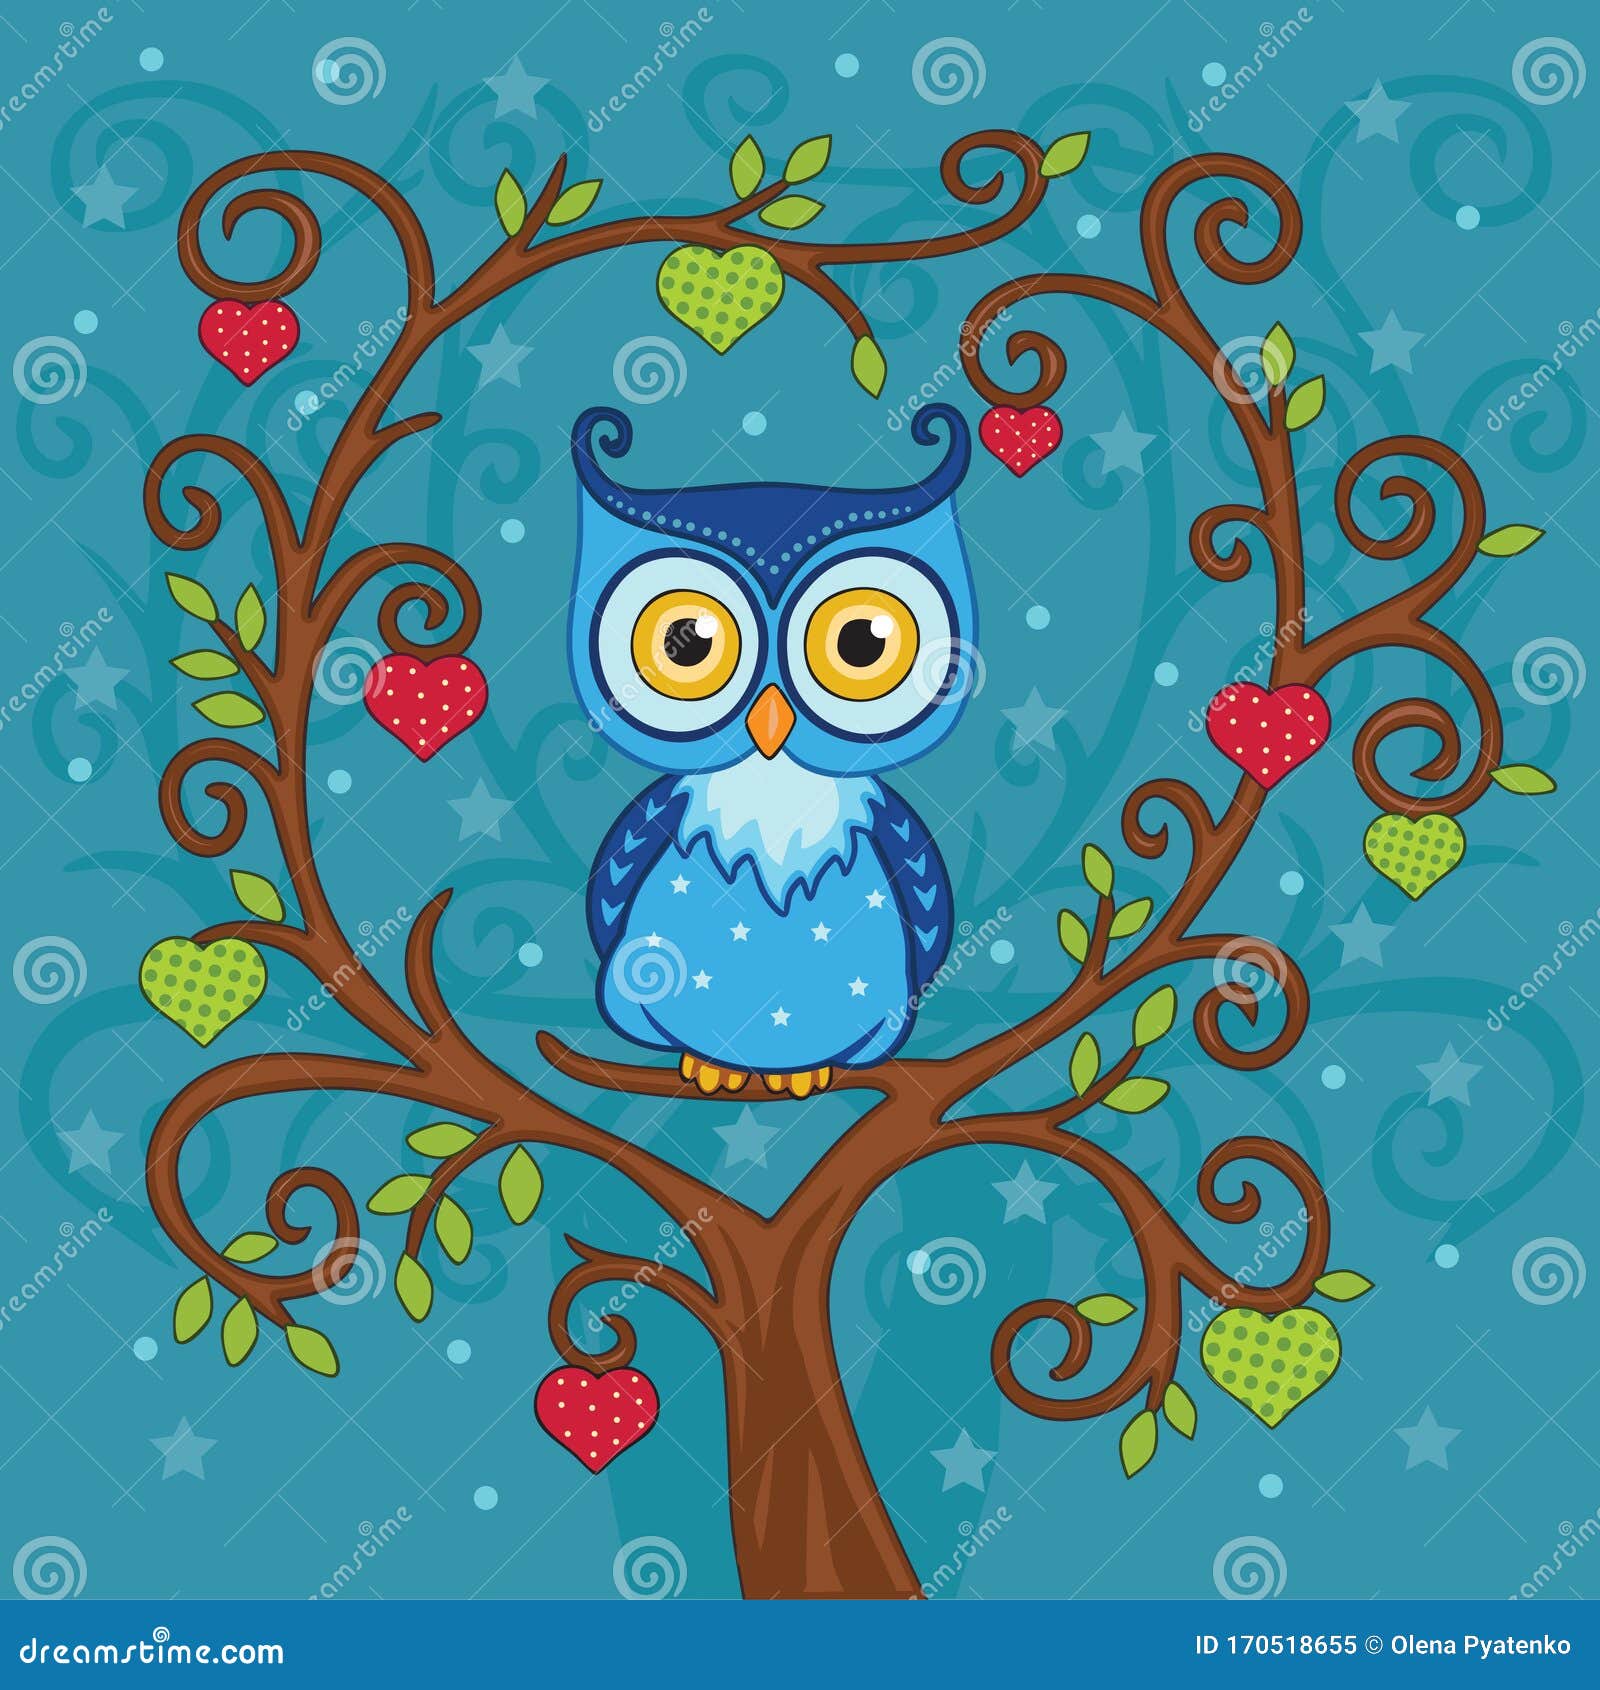 Cute Funny Owl on Abstract Blue Background. Children`s Cartoon Illustration  with Fabulous Animal or Bird, Heart and . Stock Vector -  Illustration of funny, charm: 170518655